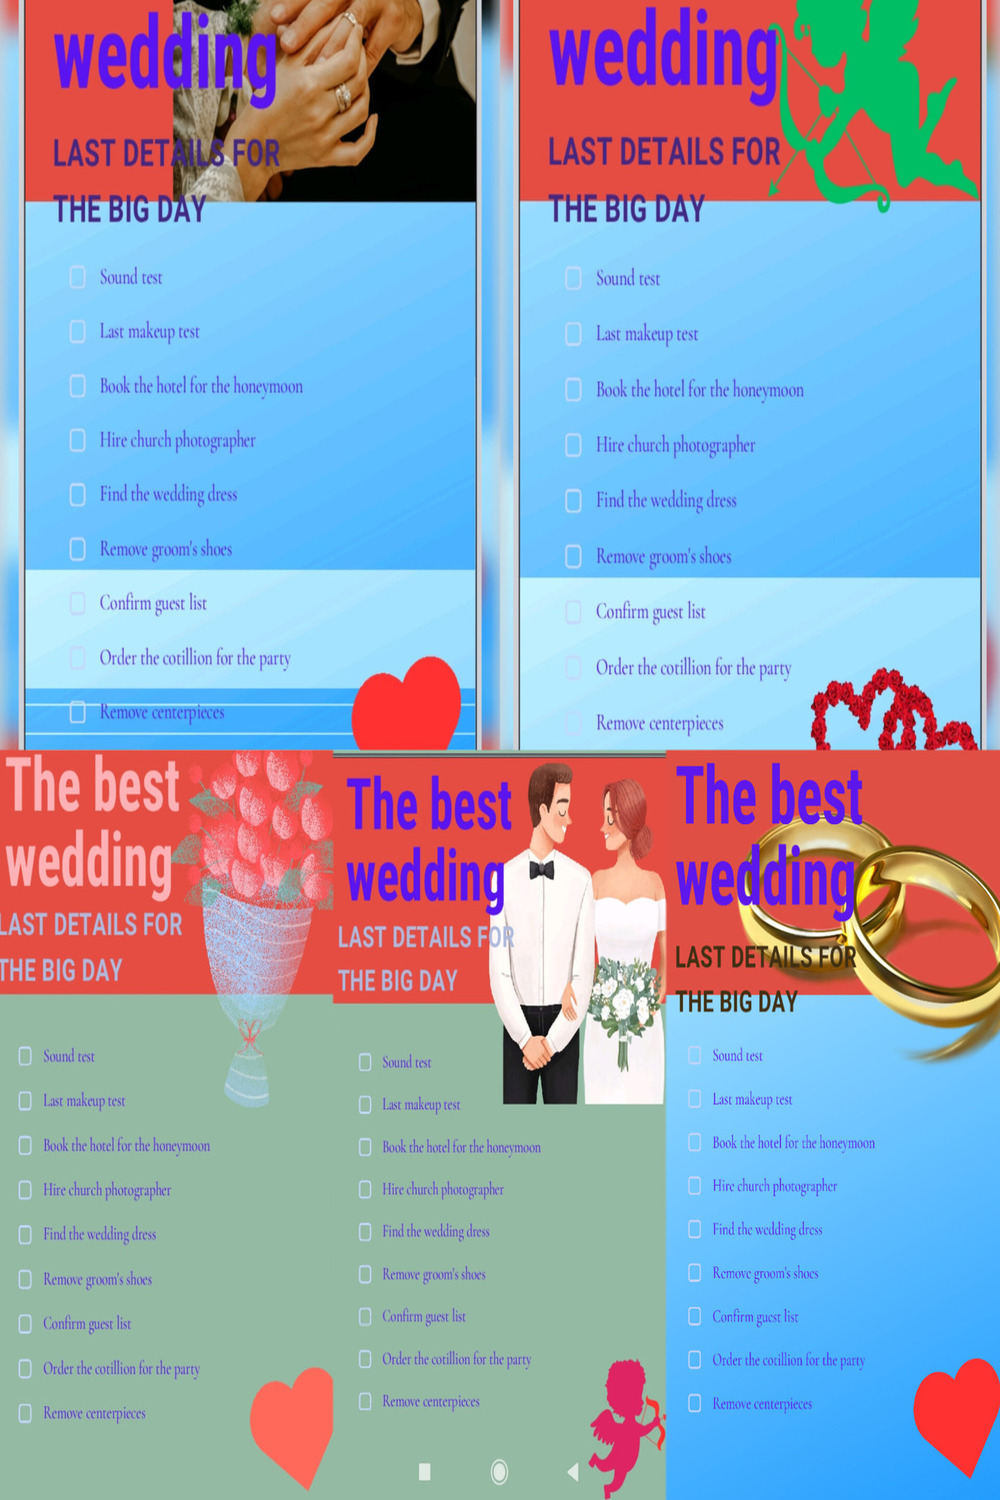 Weeding pinterest preview image.